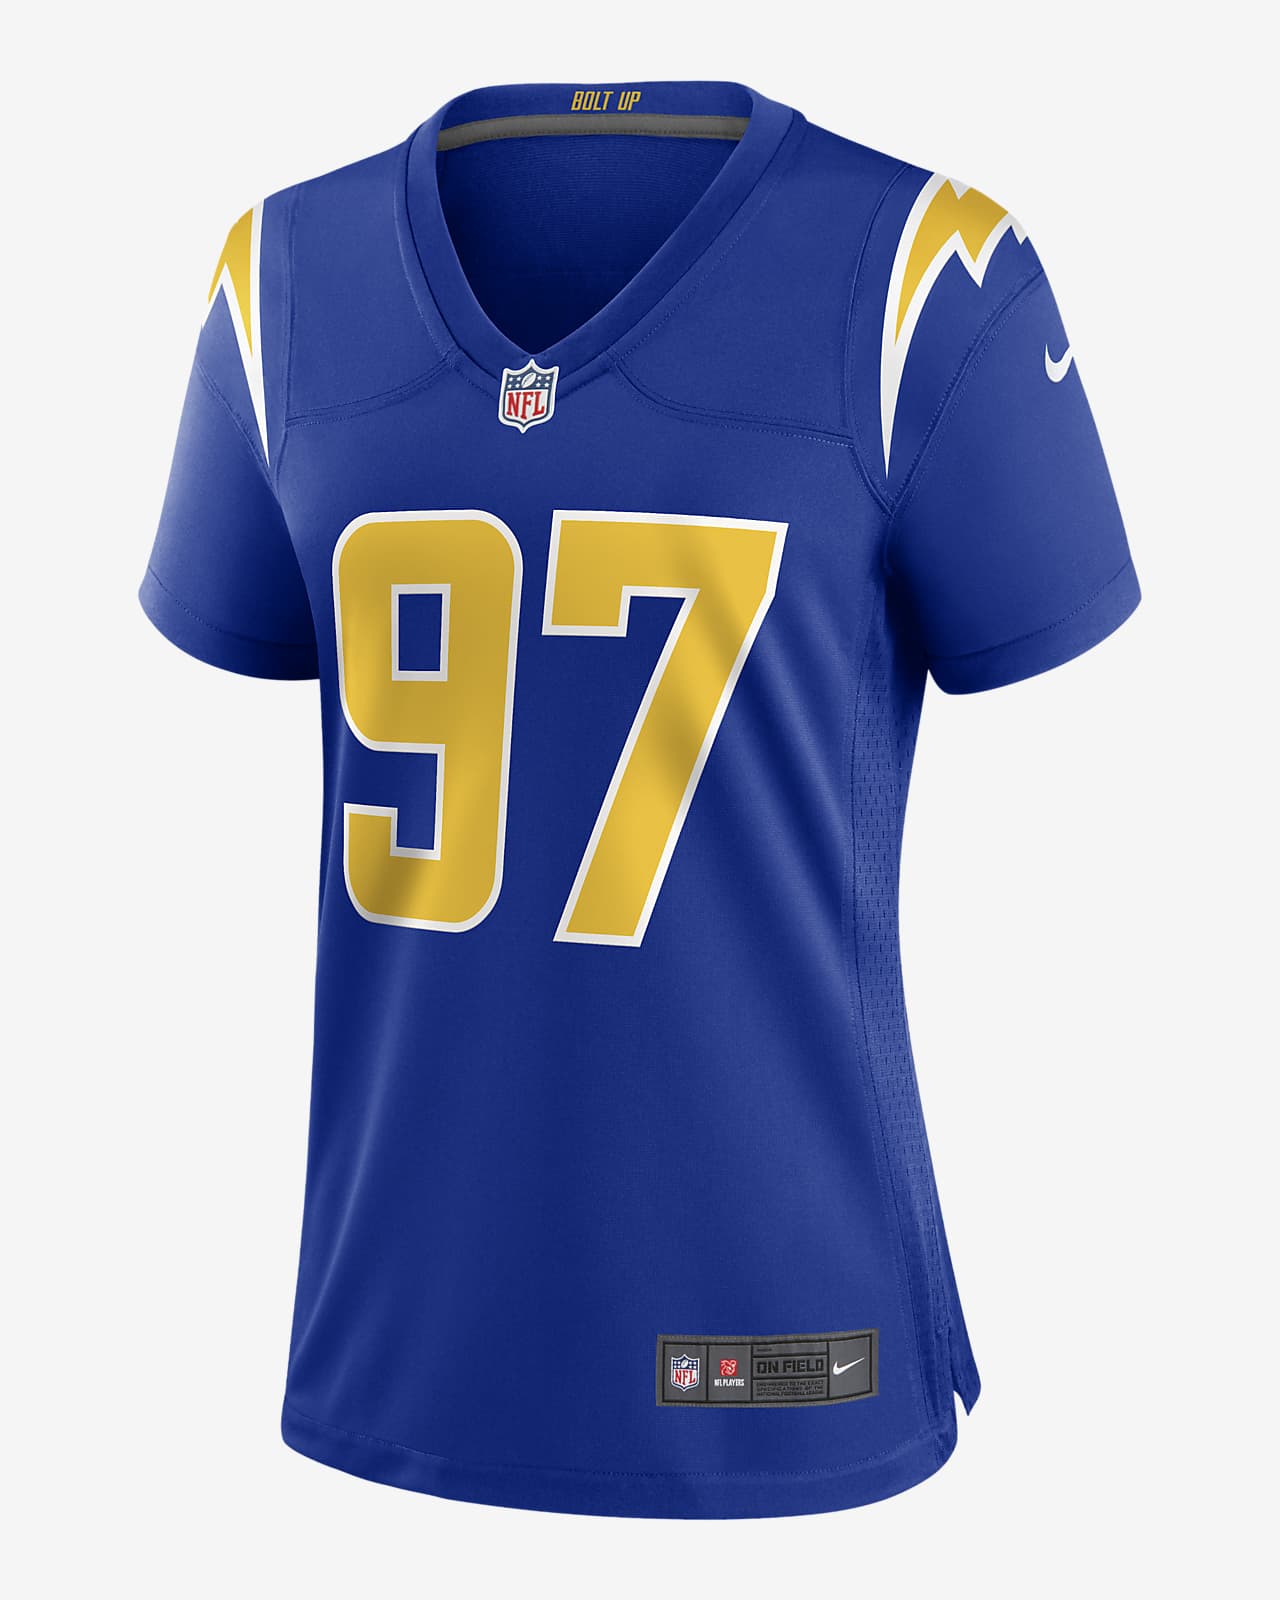 bosa chargers jersey